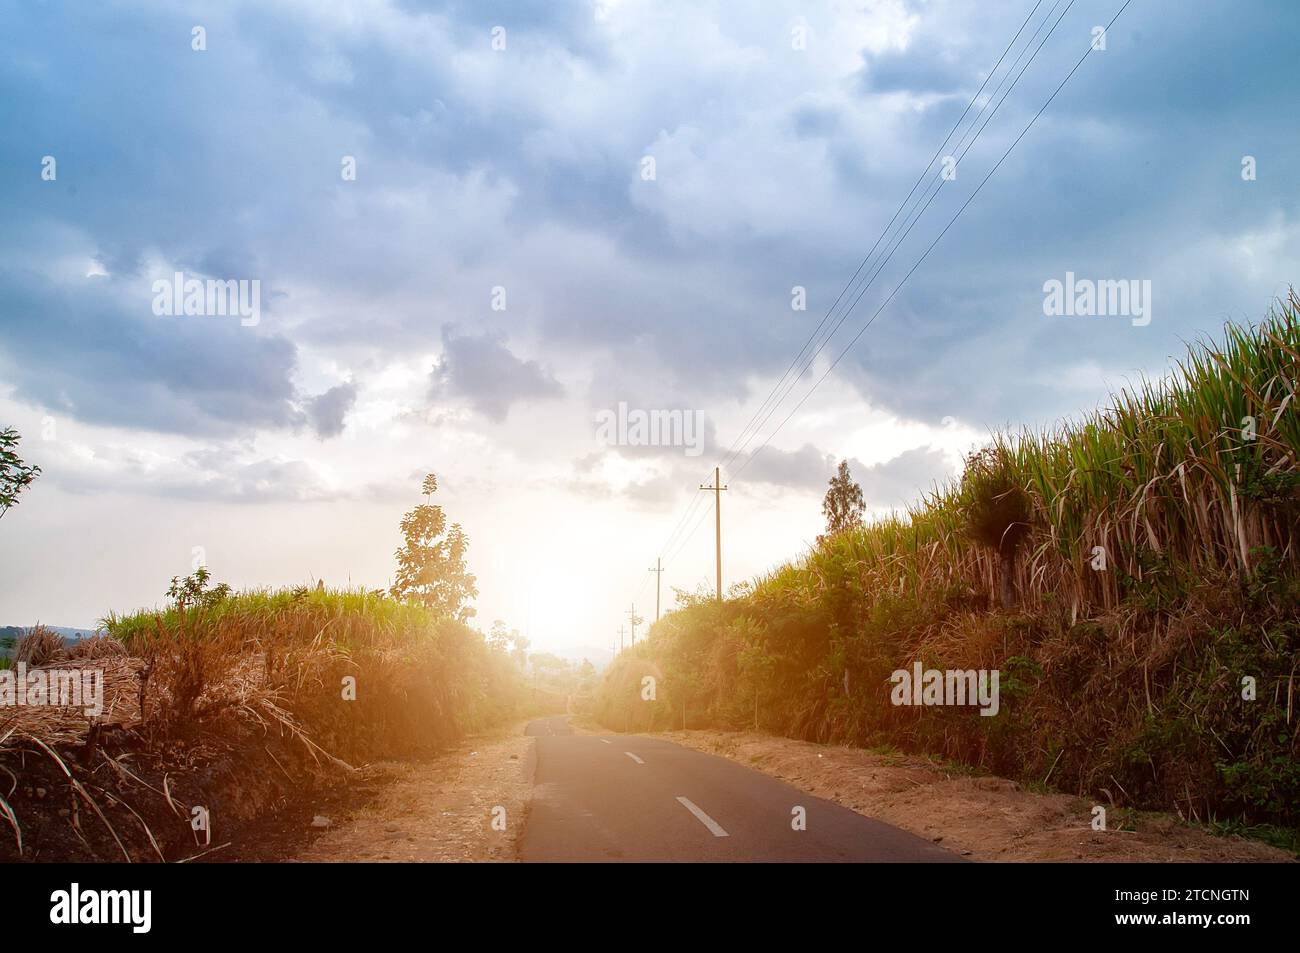 The road goes straight uphill between two cliffs Stock Photo